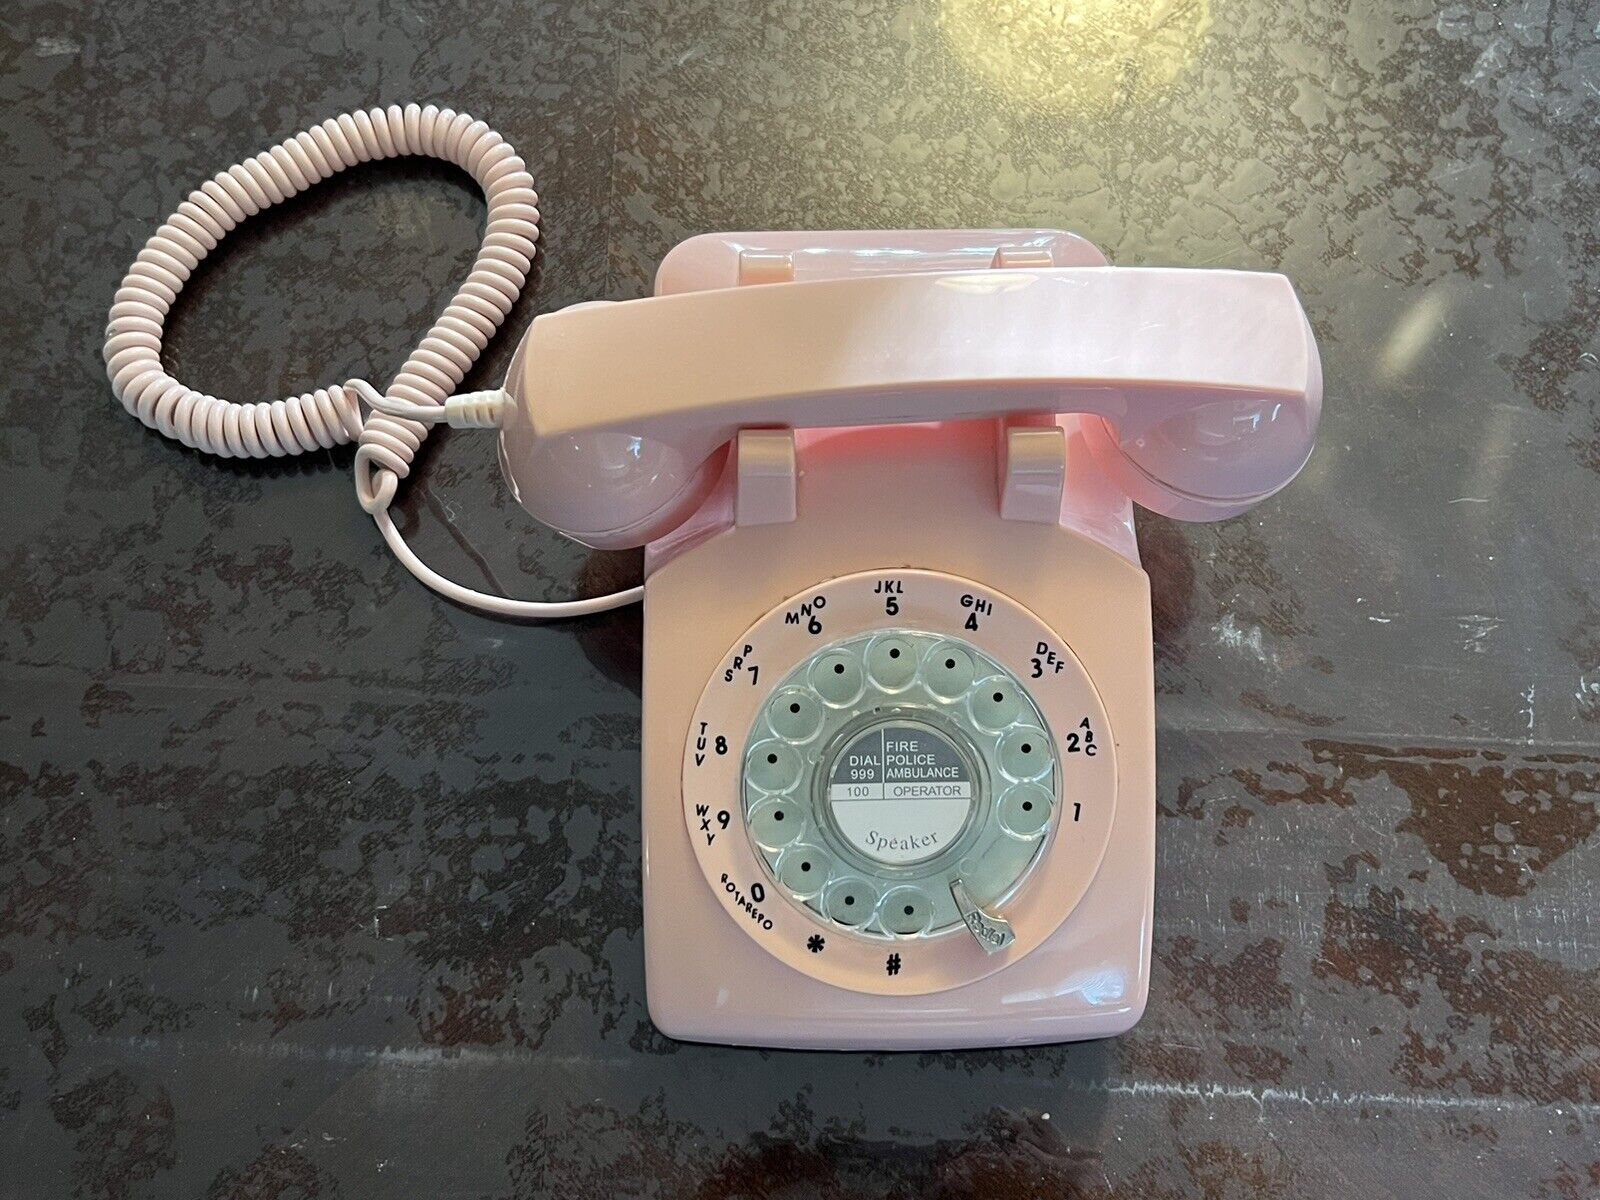 Retro Vintage 1970s Style Pink Rotary Dial Phone